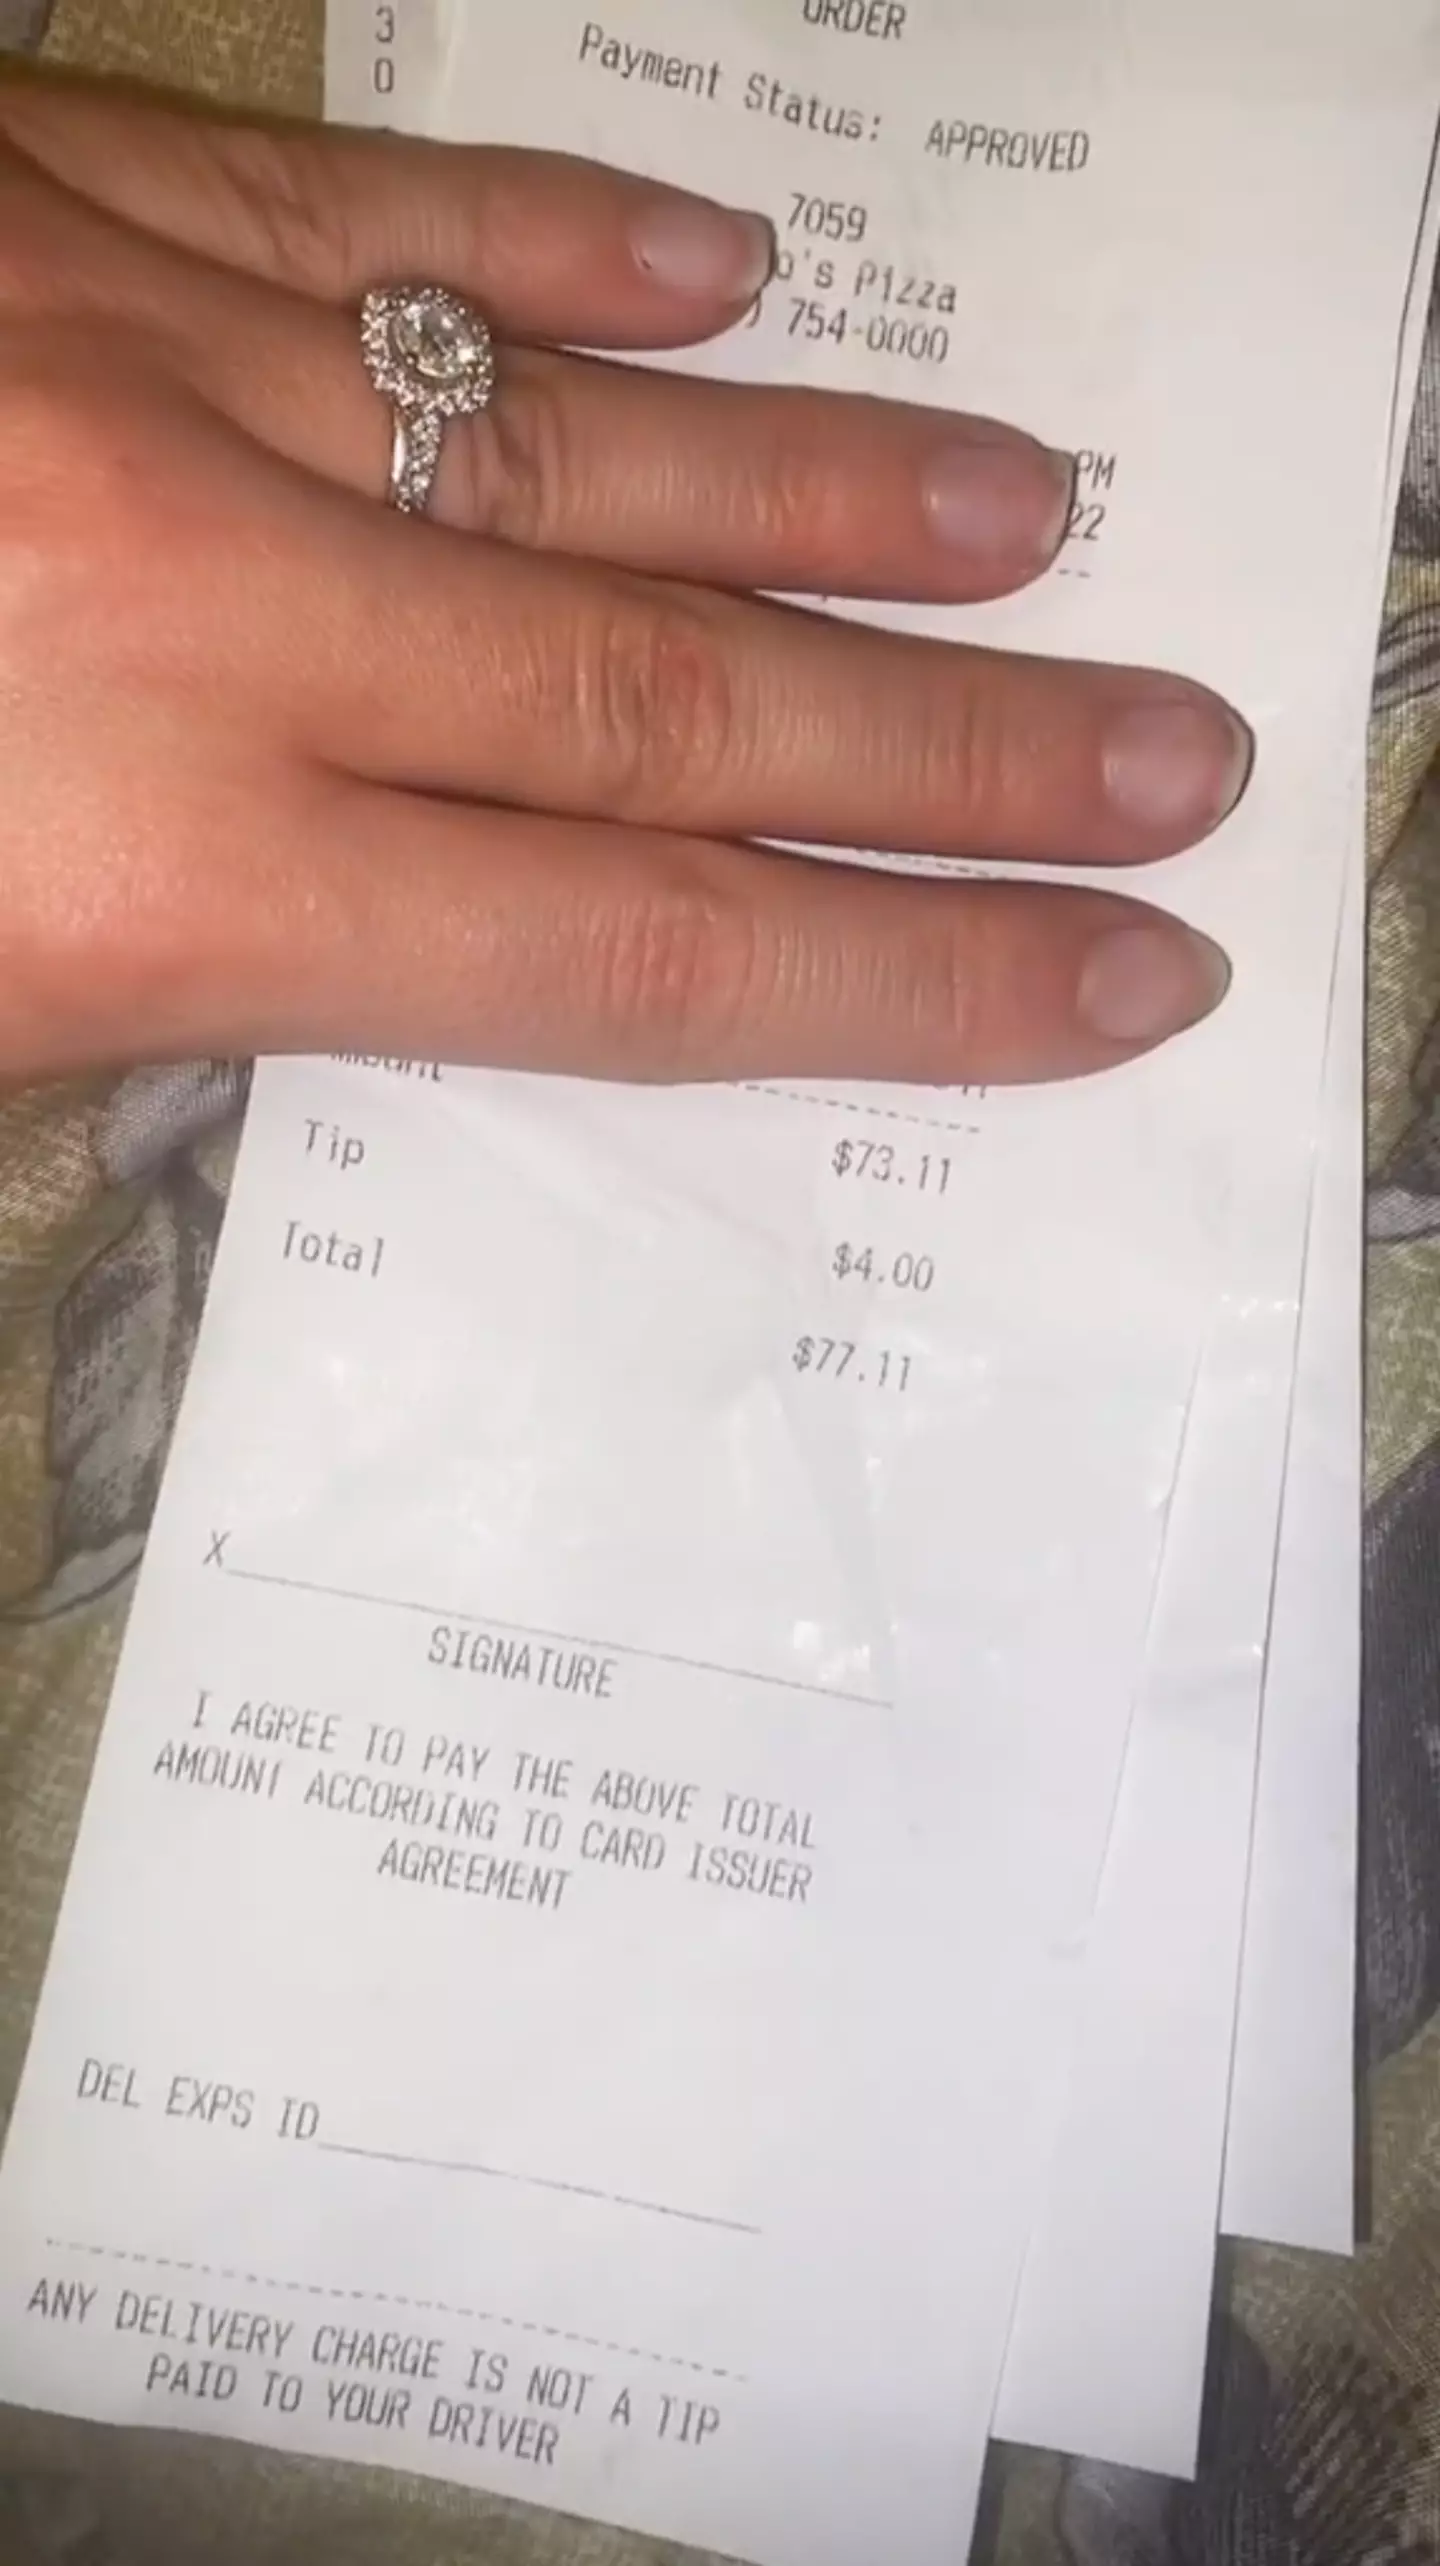 She showed a typical tip she might get on a shift.